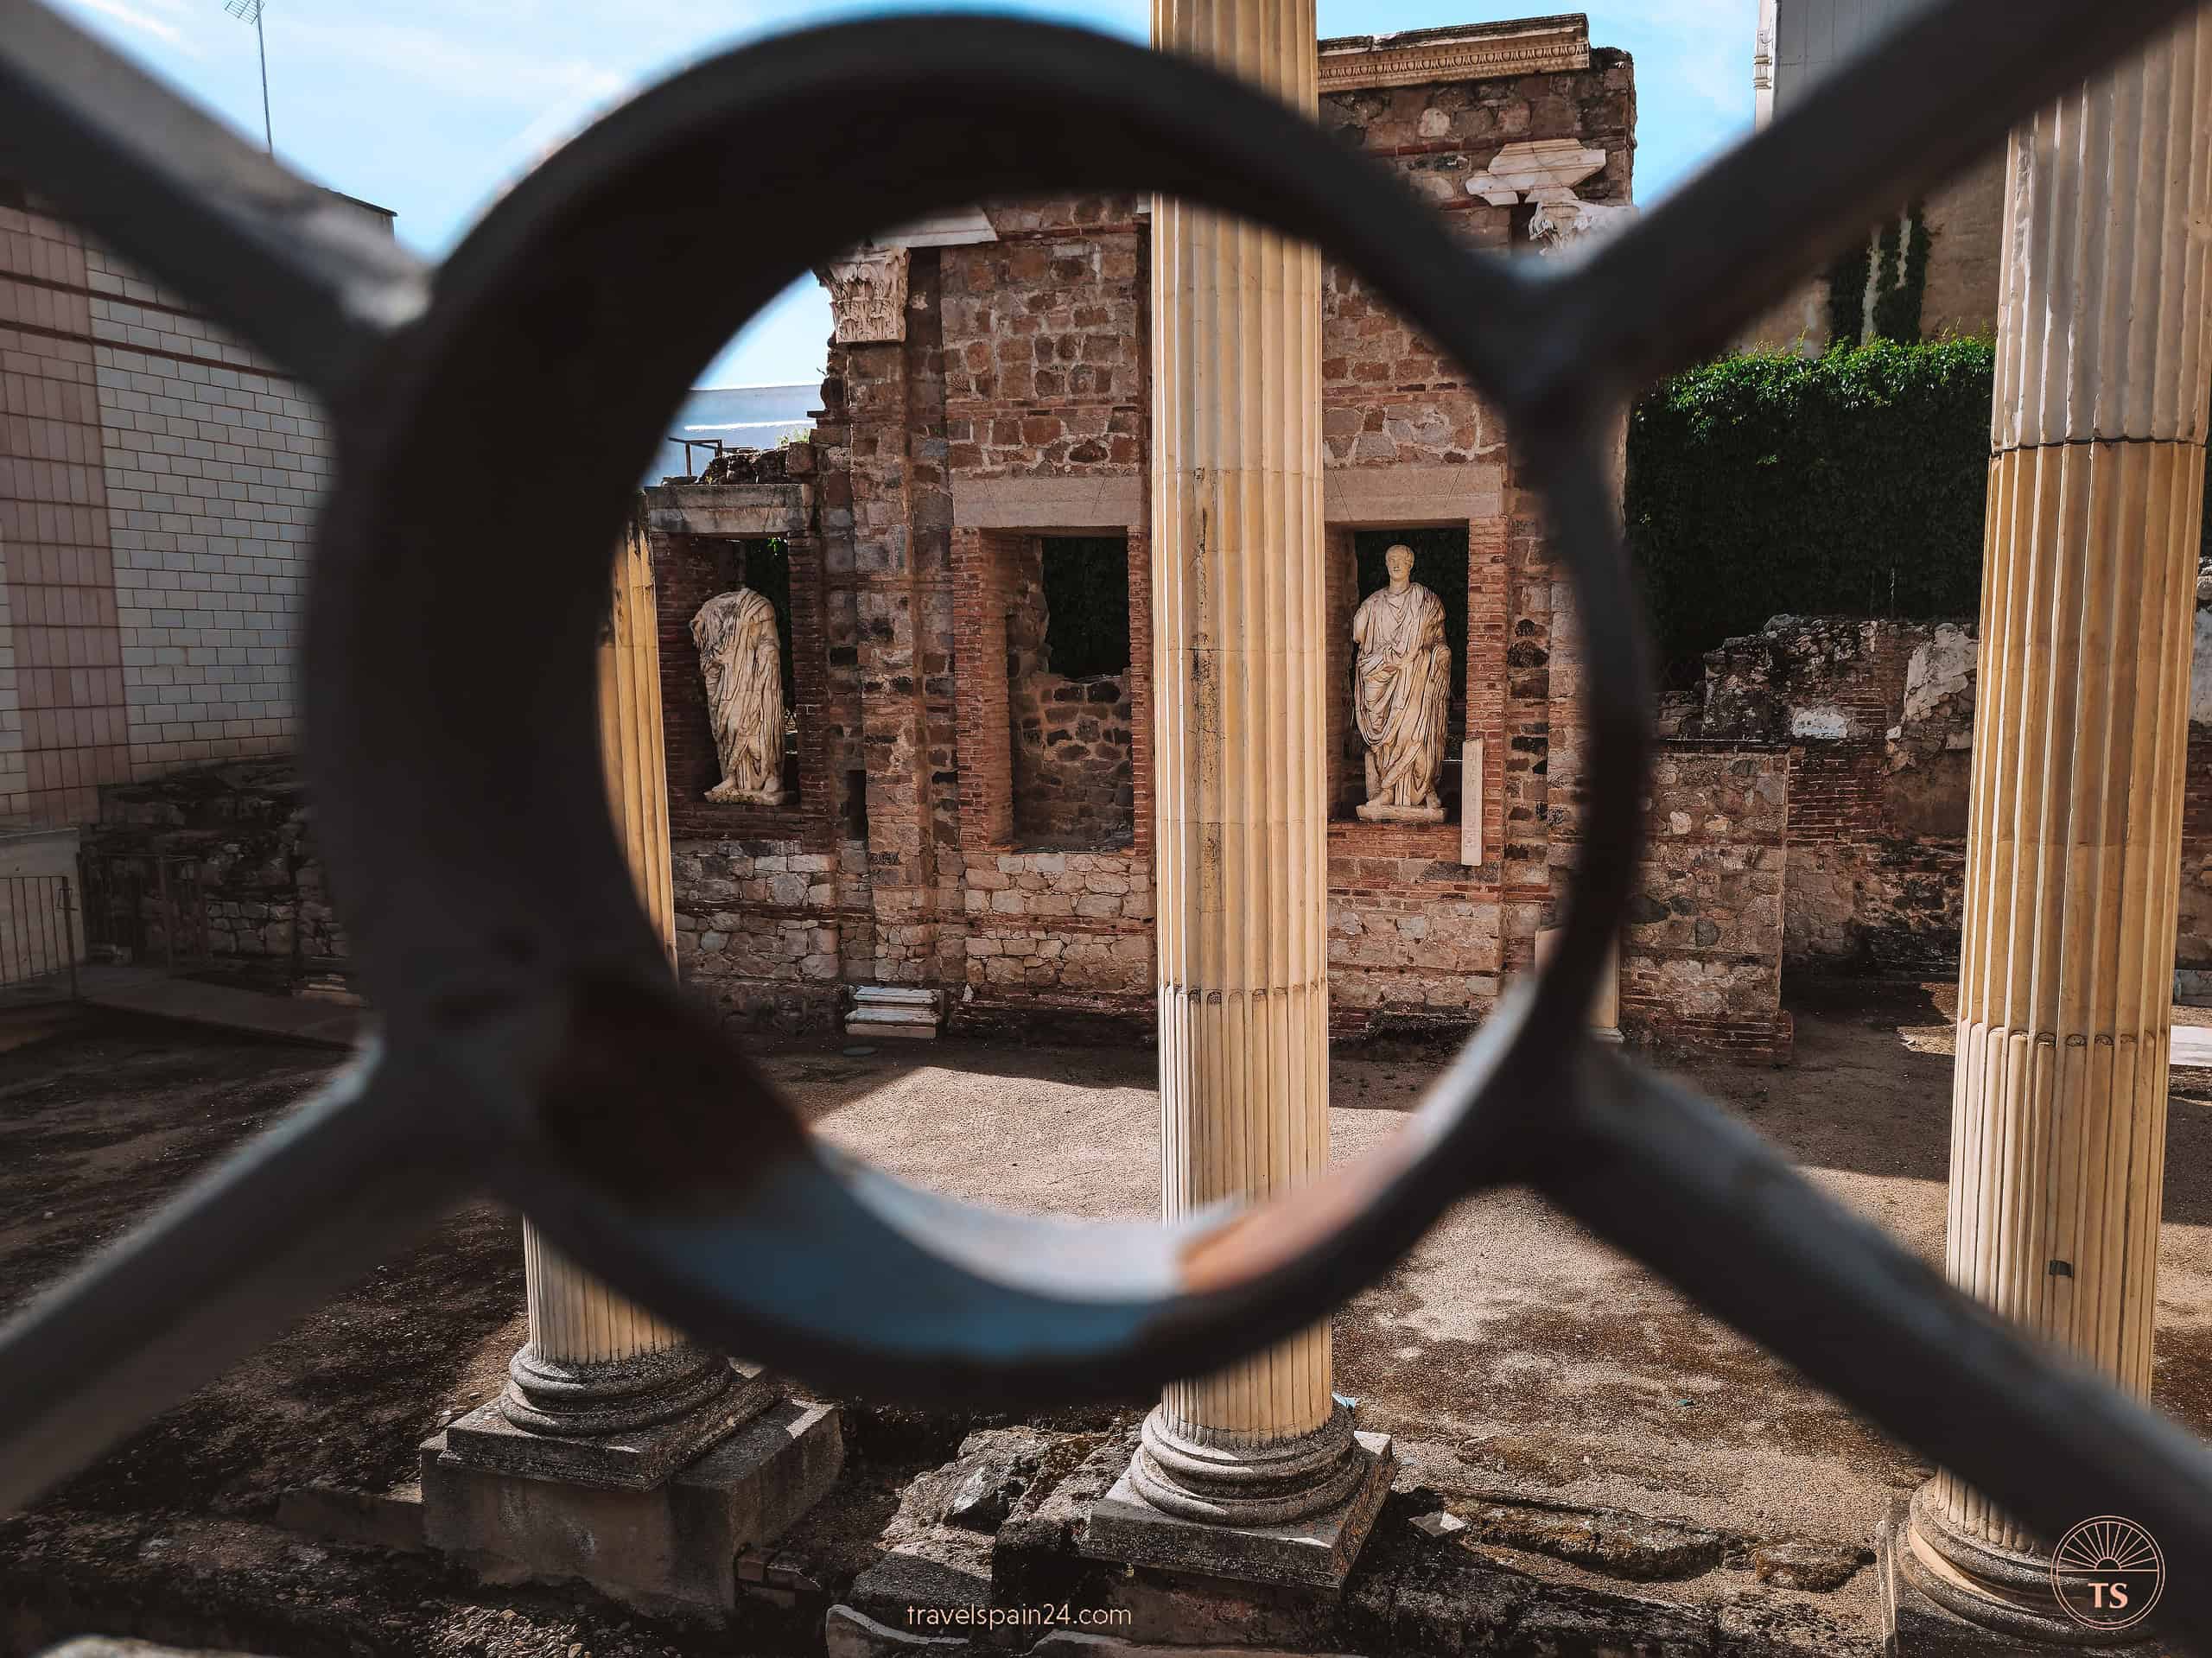 Artistic view through a fence ring of the Portico del Foro Municipal de Augusta Emerita in Mérida, highlighting ancient pillars and statues from the Roman era